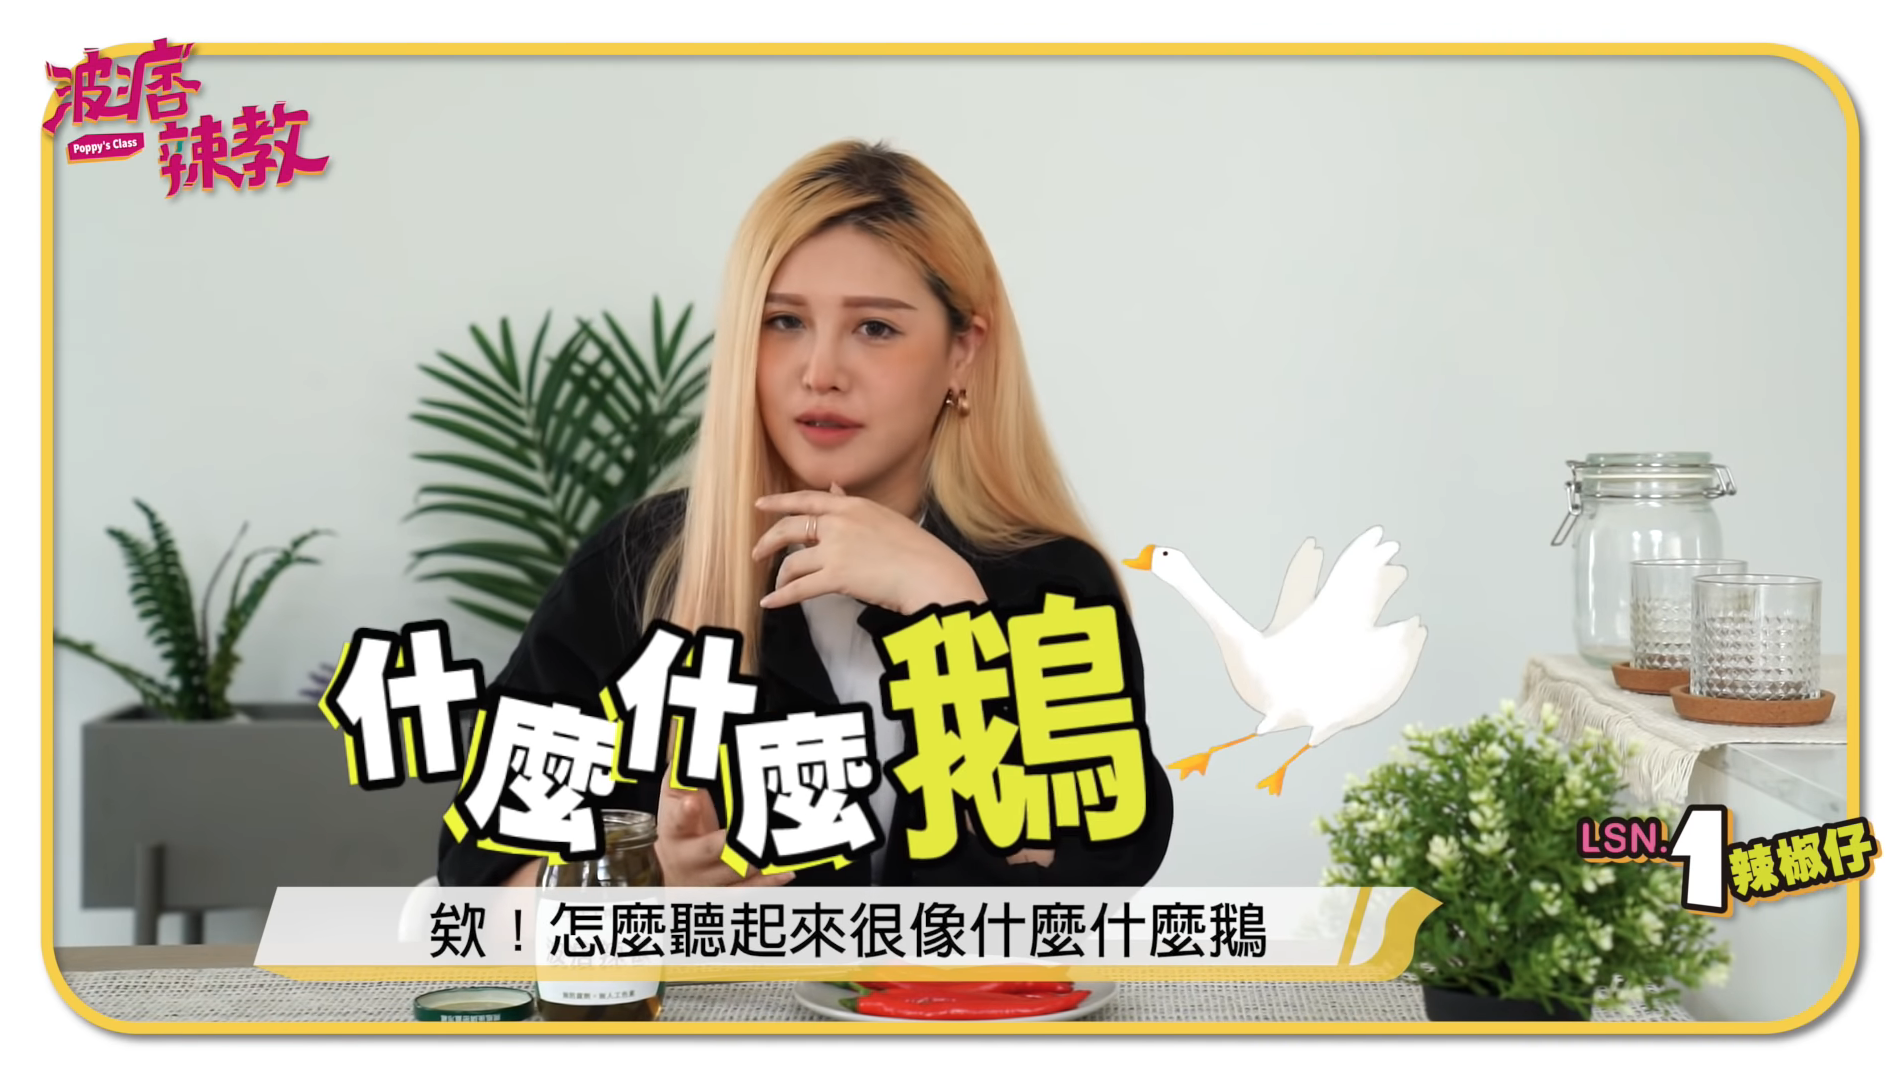 Read more about the article 美妝網紅拍片「你敢吃辣椒鵝嗎」　網友眼尖「是客家話啦！」